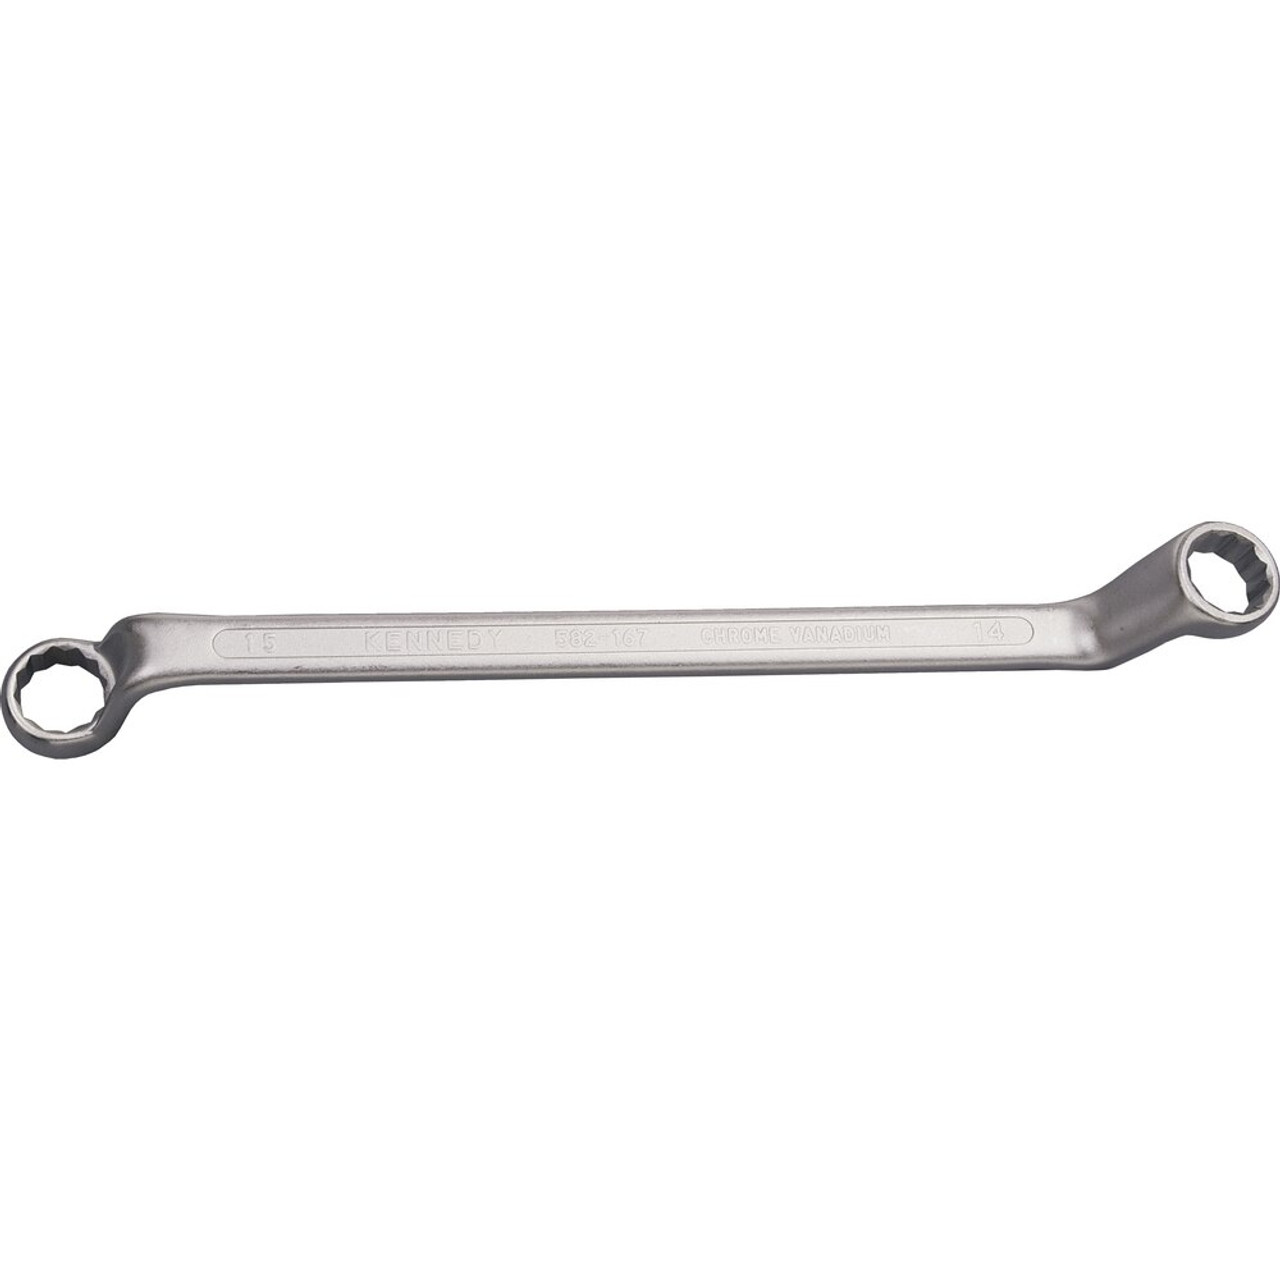 10mm Metric MM Combination Gear Ratchet Spanner Wrench 72 Teeth | eBay